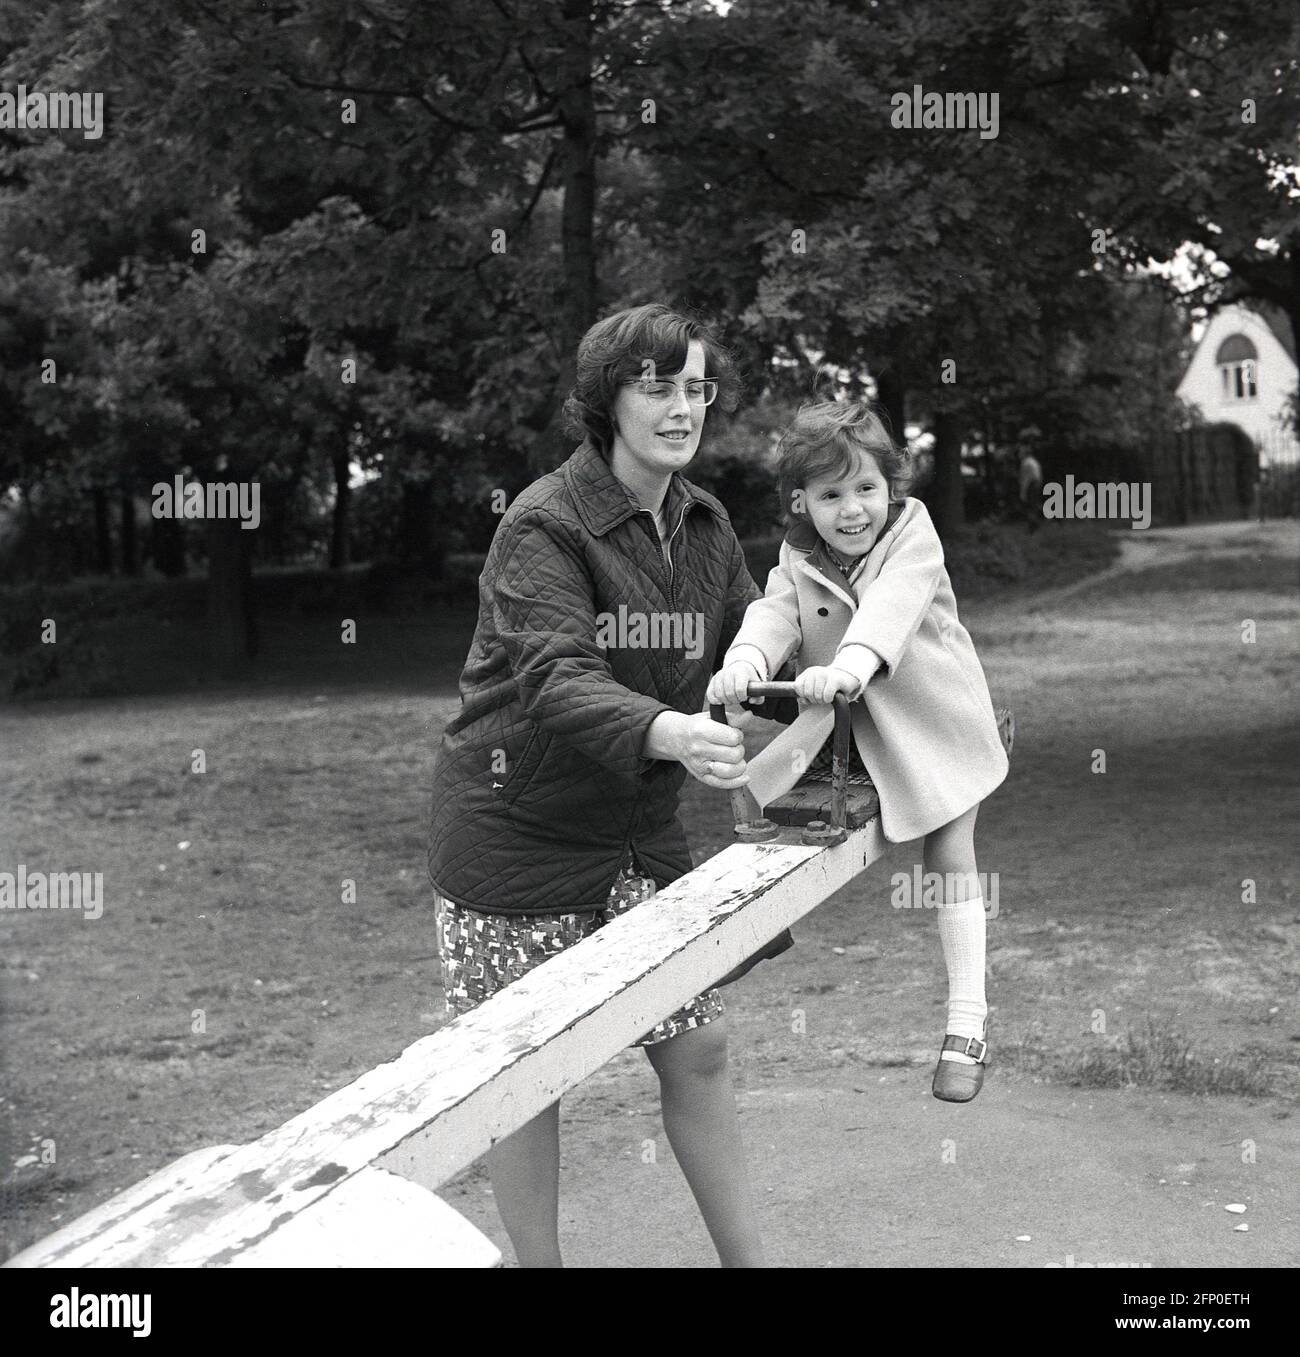 1960s, historical, with her mother beside her, a young girl on a metal see-saw at a park playground, England, UK. Also known as a teeter-totter or teeterboard. A traditional piece of playground equipment, the seesaw is a long narrow metal, as seen here (or wooden) beam with a pivot point in the centre,  so as one end goes up, the other goes down, with handles eiither end to hold onto. Great fun, they were a common site in public playgrounds across Britain in this era Stock Photo